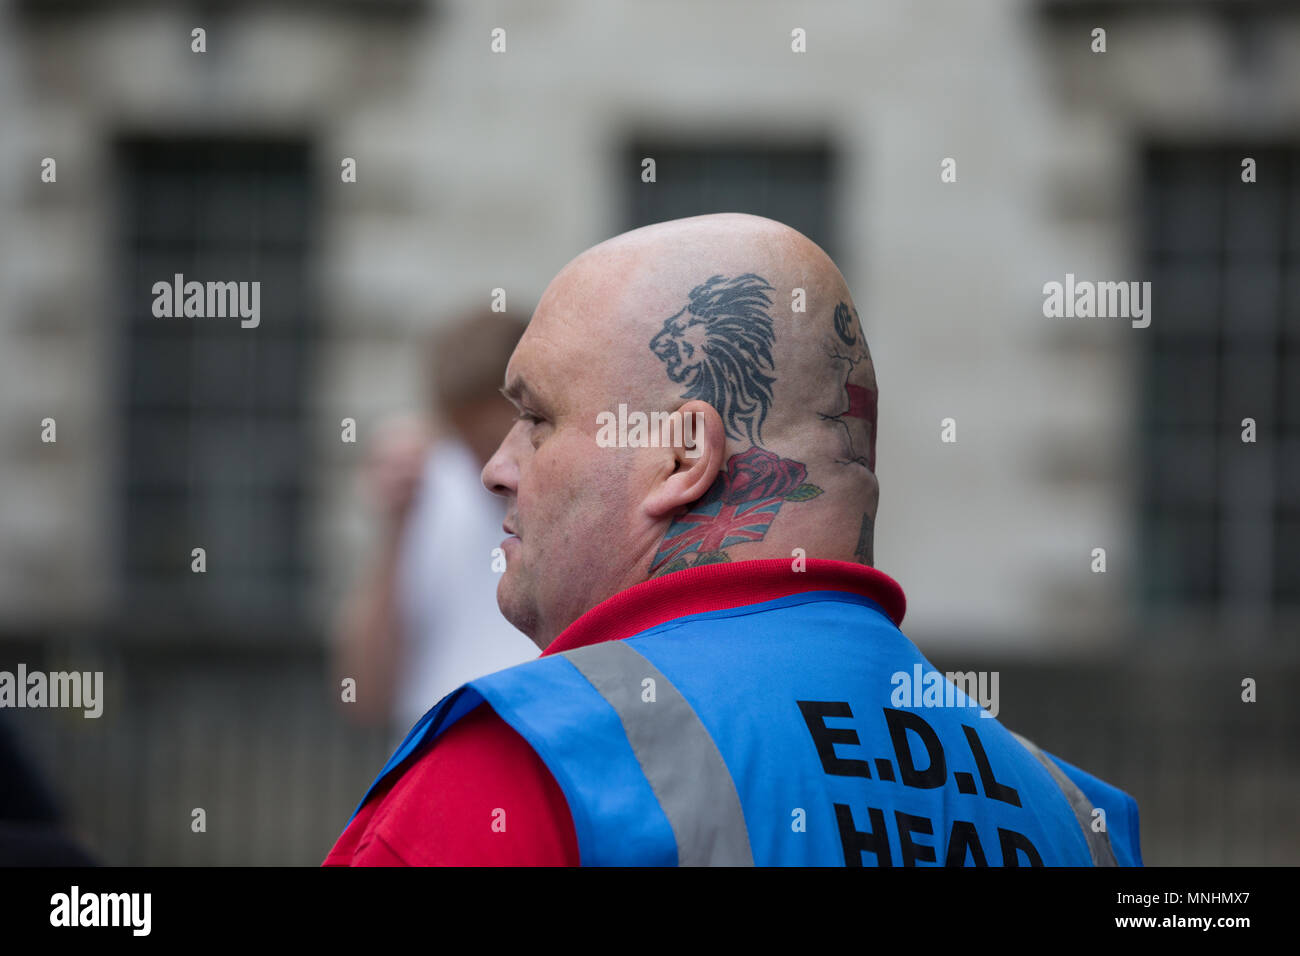 An EDL head steward overseas the march in central London Stock Photo